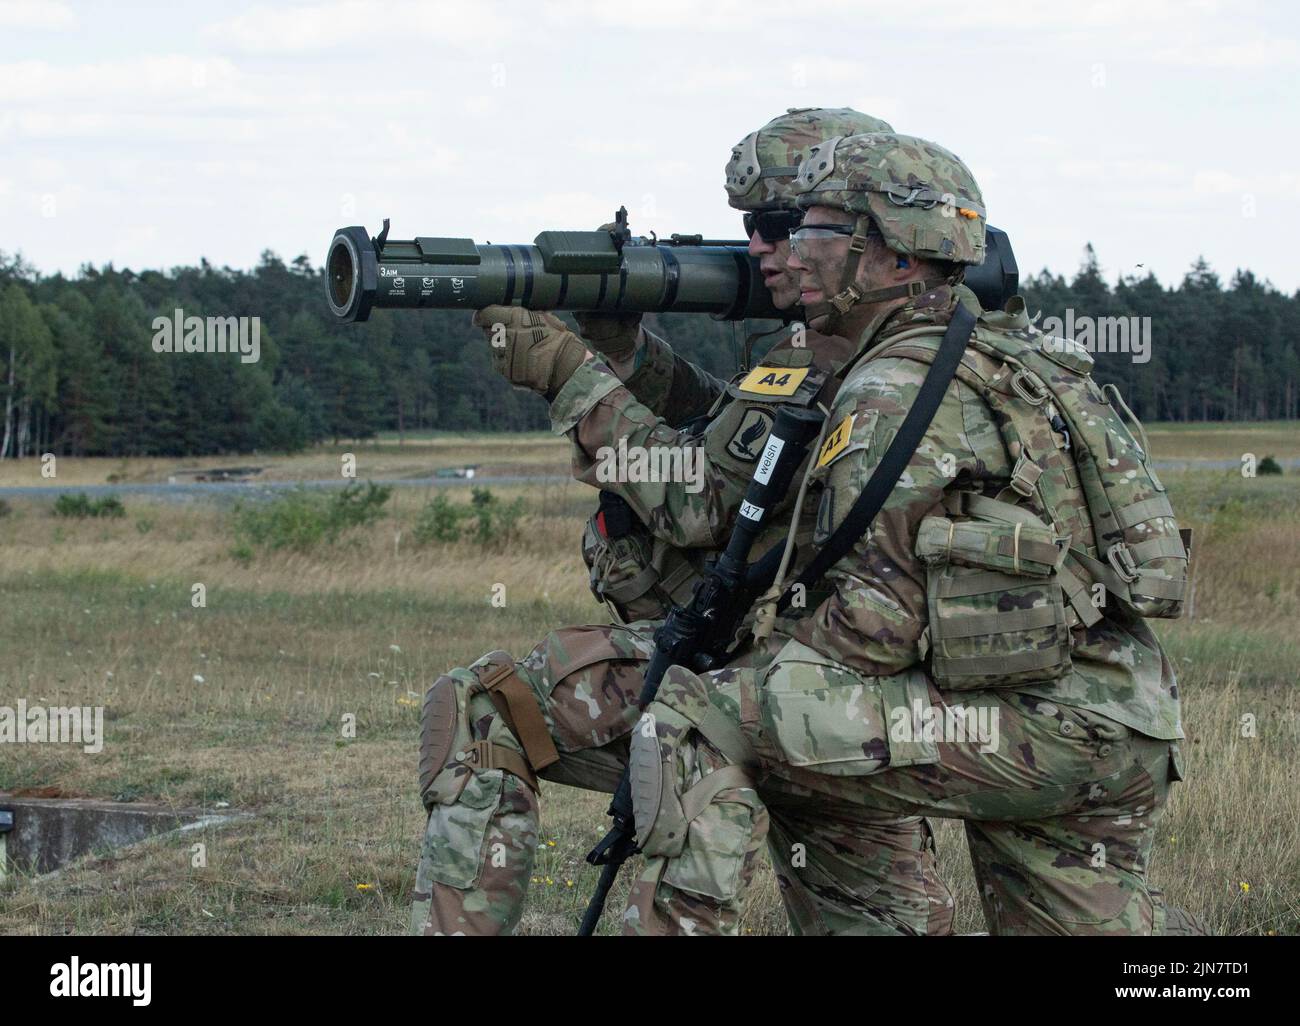 U.S. Army Spc. Tyler Graessle ,left, and Staff Sgt. Thomas Schneider both assigned to the Southern European Task Force (SEATAF) take aim with an M1-36 recoilless rifle during the 2022 U.S. Army Europe and Africa Best Squad Competition on Grafenwoehr Training Area, Germany Aug. 9, 2022. Teams from across USAREUR-AF test their tactical proficiency, communication, and overall cohesion as they compete for the title of Best Squad. Winners of this competition will advance to represent USAREUR-AF at the U.S. Army Best Squad Competition at Fort Bragg, North Carolina later this year. Stock Photo